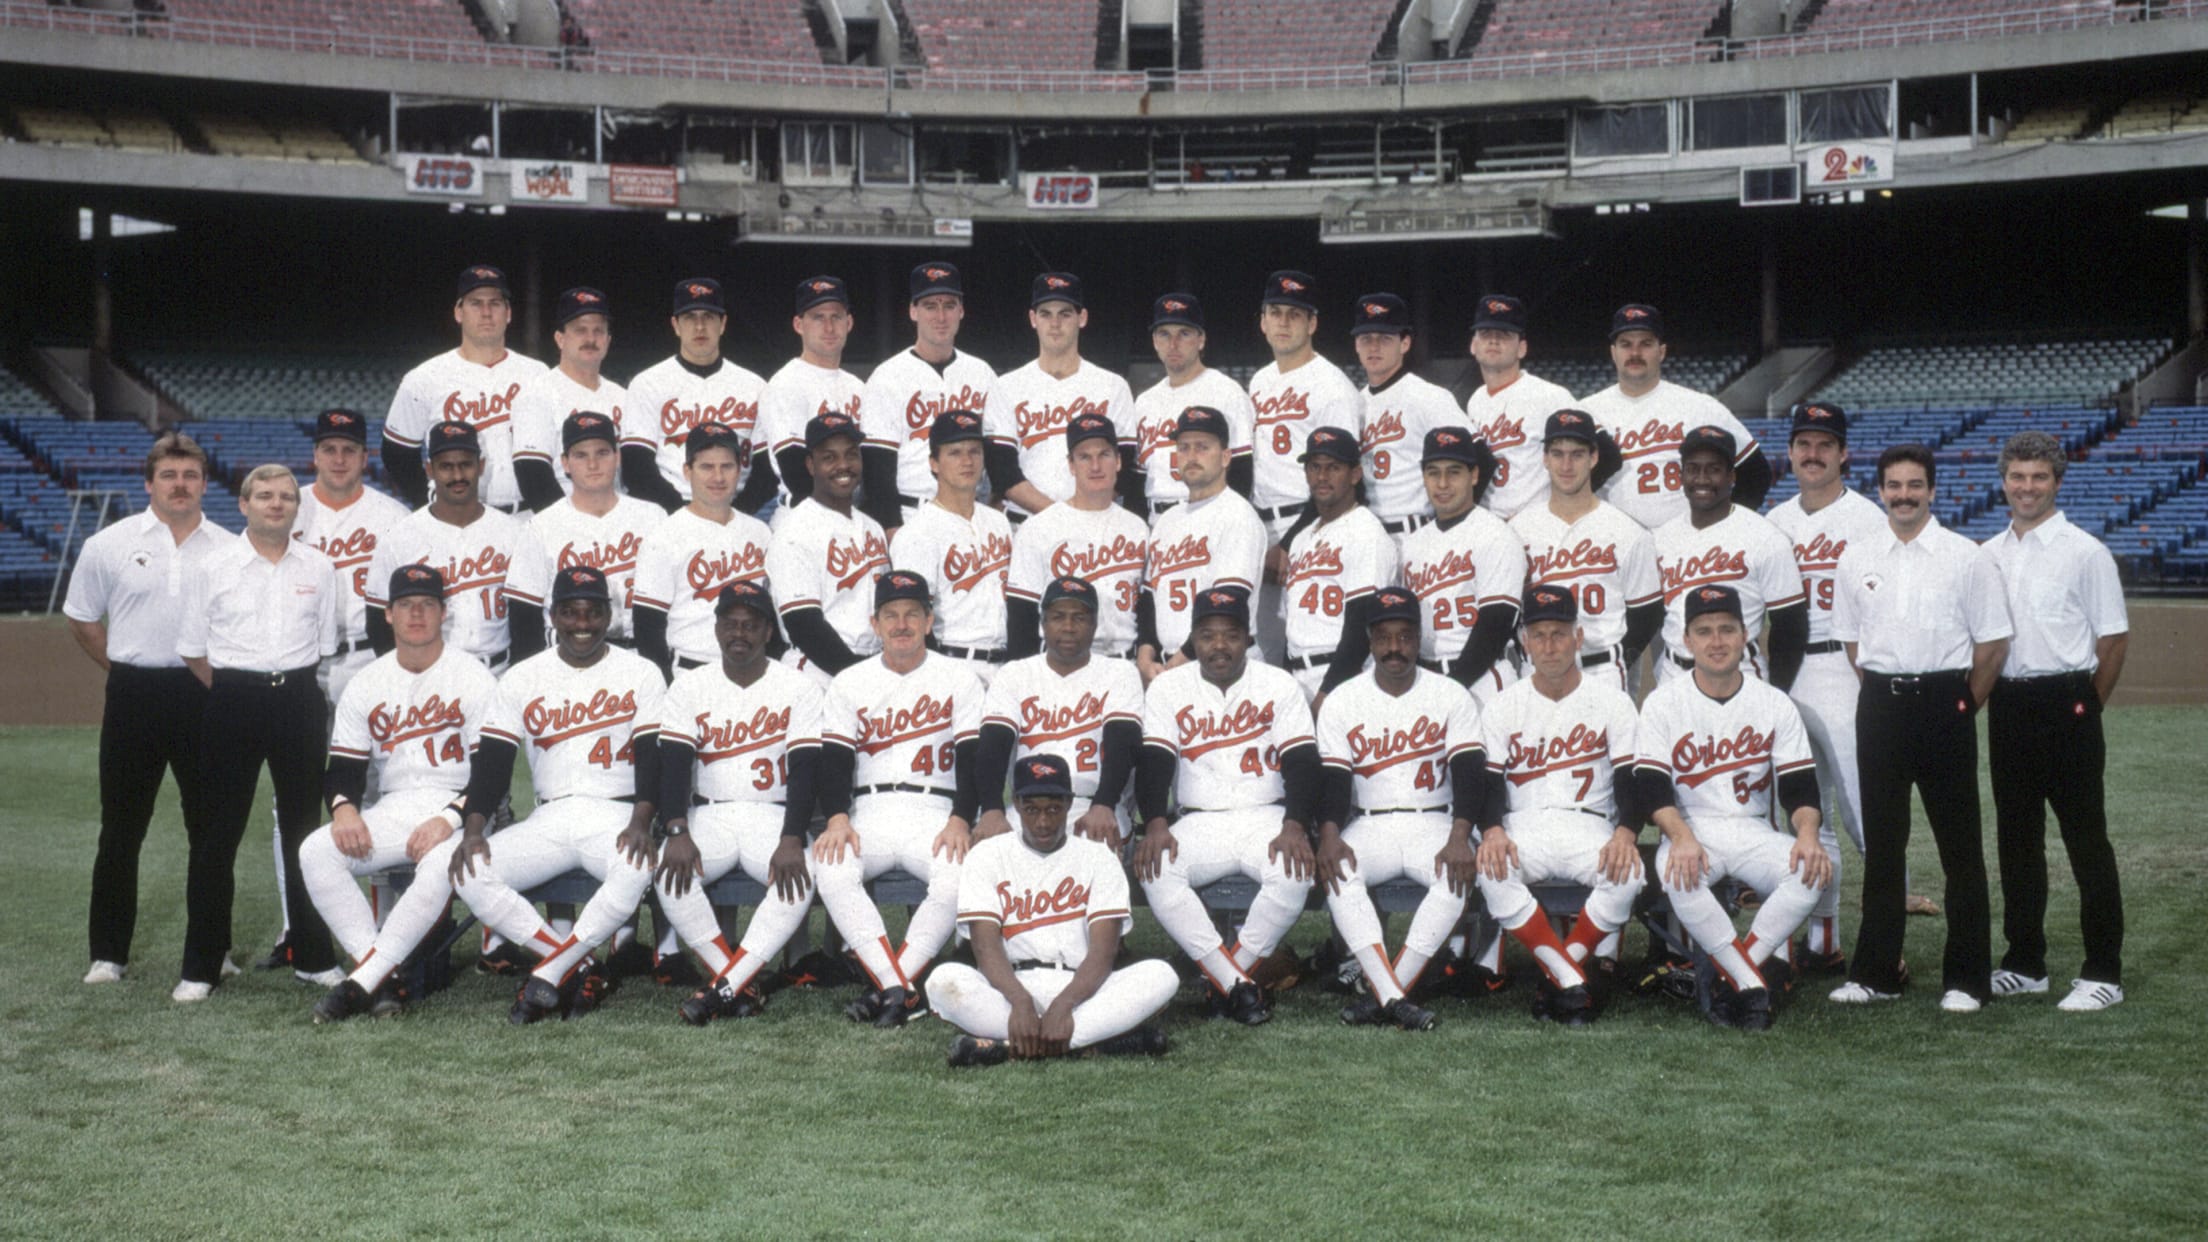 Baltimore Orioles: 54 Years Ago the 1966 World Series Began